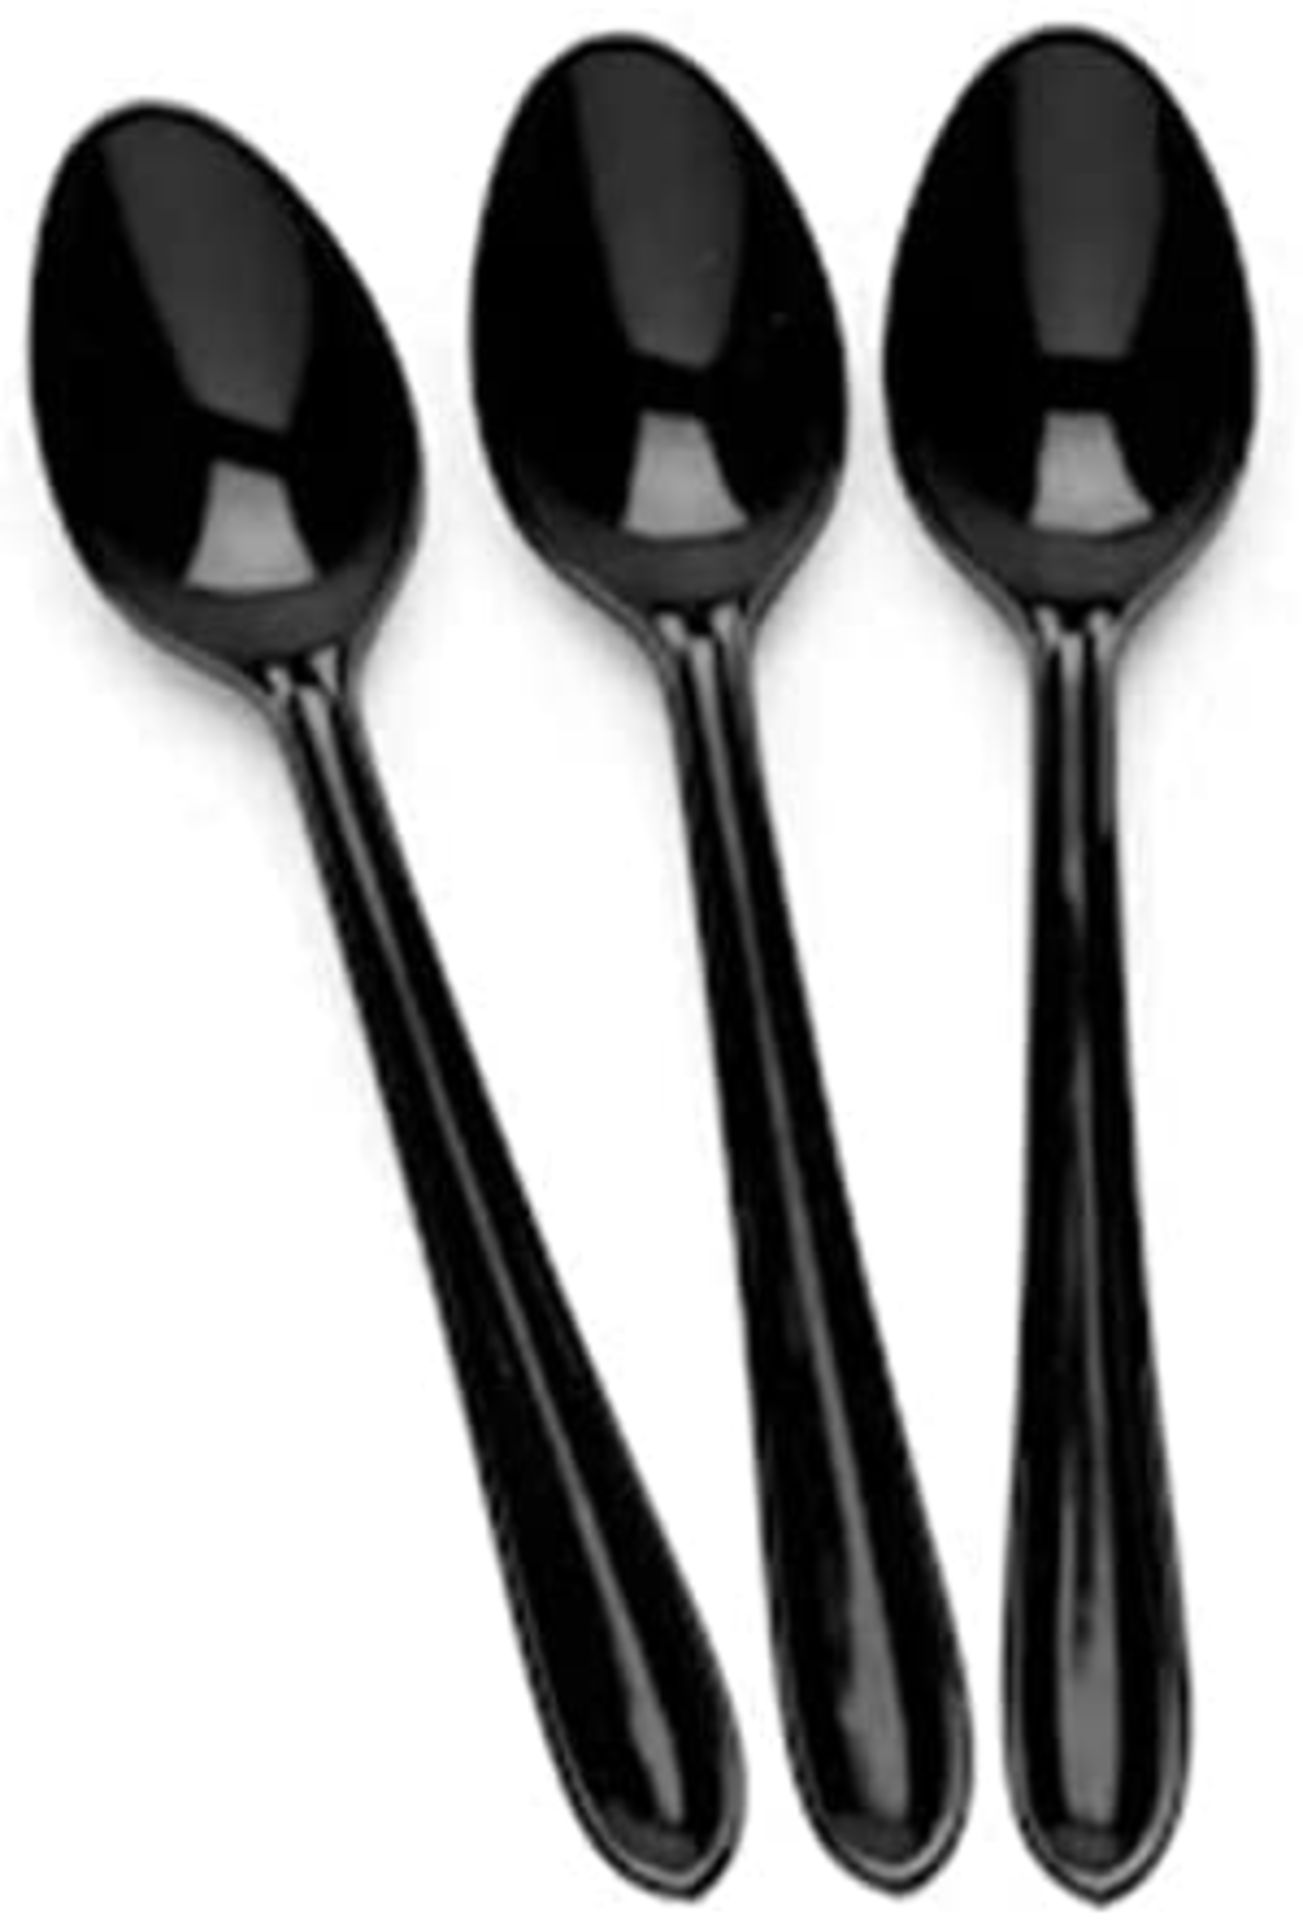 RRP - £11.80 100 Black Plastic Spoons - Heavy Duty - Washable and Reusable